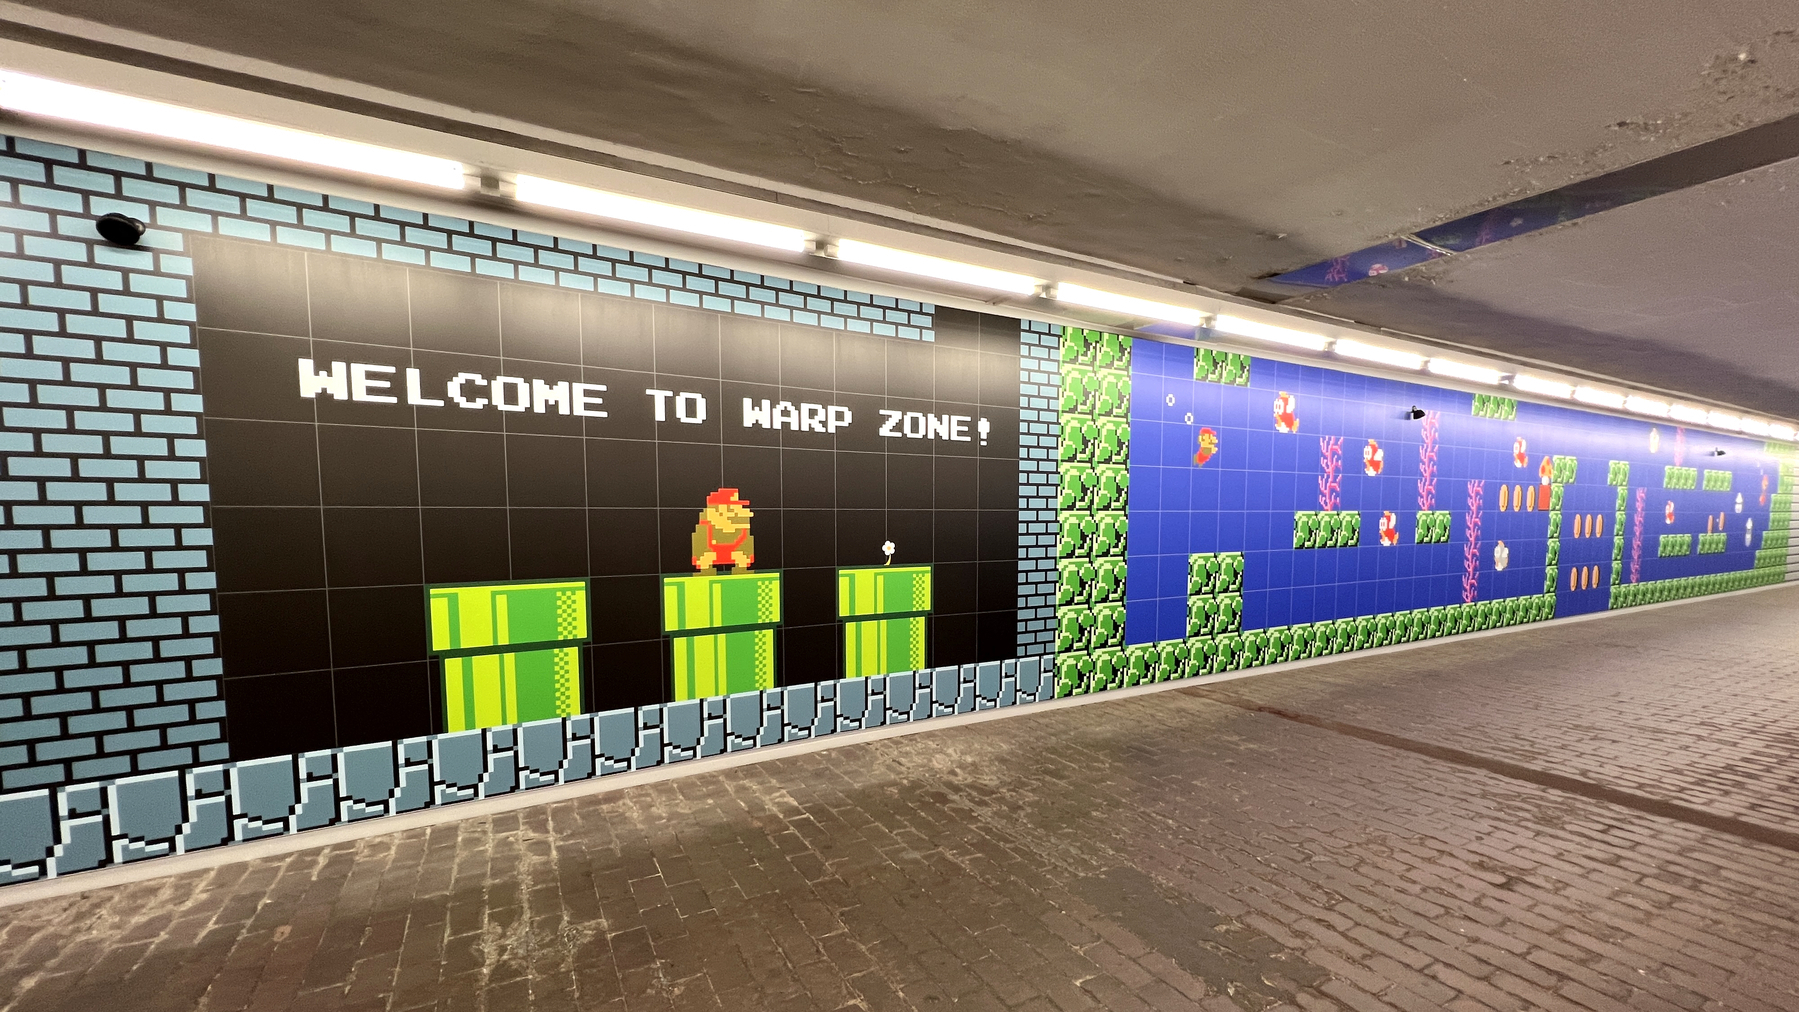 Wall mural with scene of Super Mario crouching to go down a pipe. Above are the words "Welcome to the Warp Zone". Next to that scene is an underwater scene with Mario swimming 